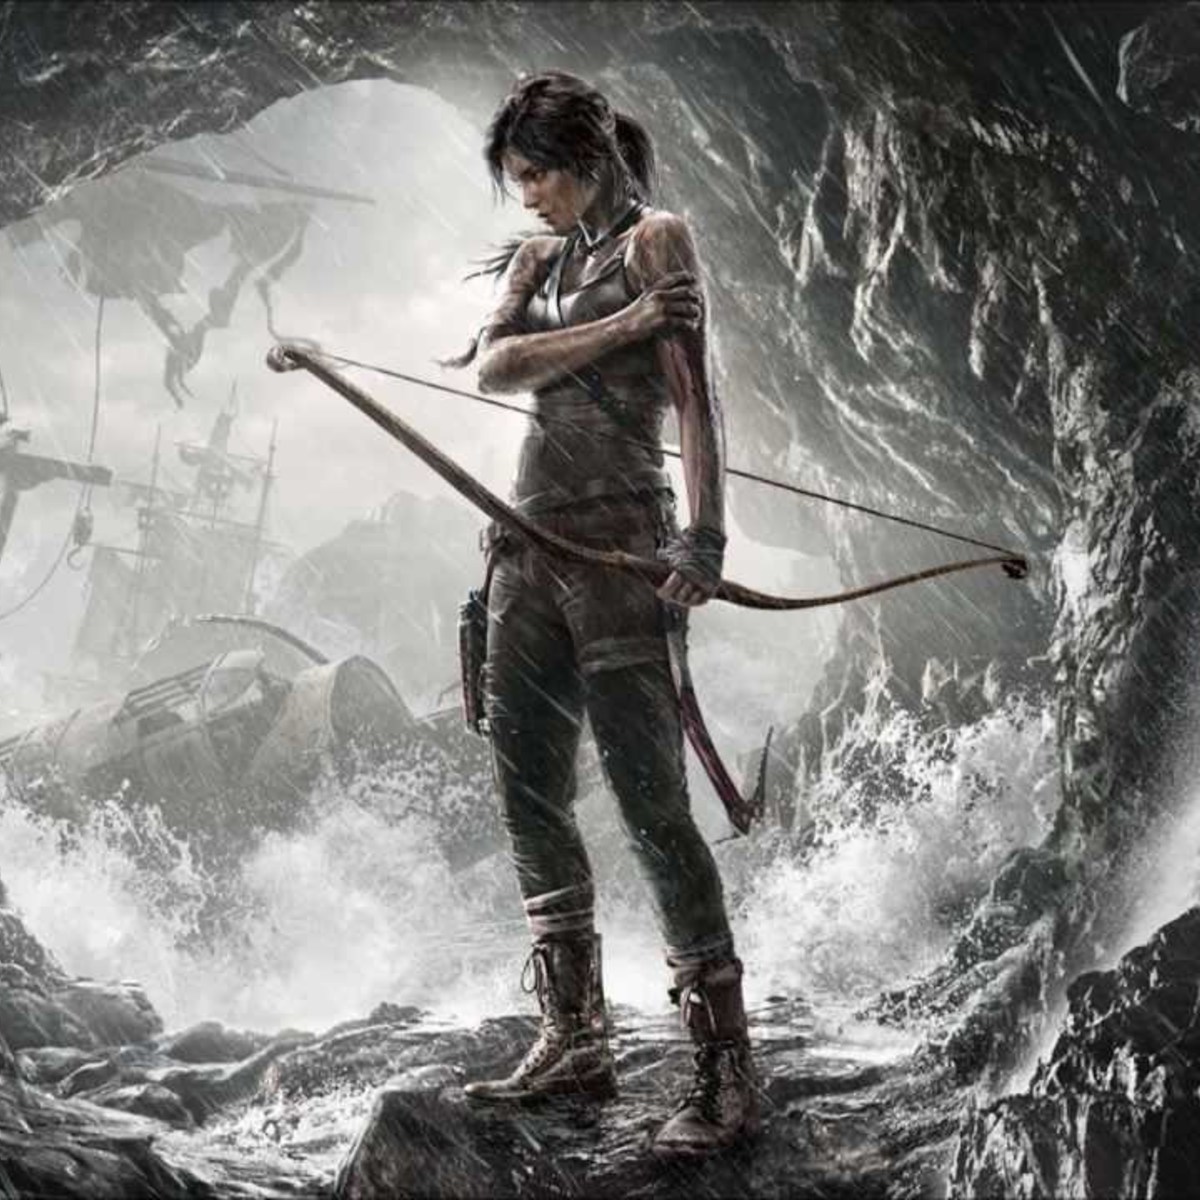 Tomb Raider GOTY is less than £10 on the Square Enix Store